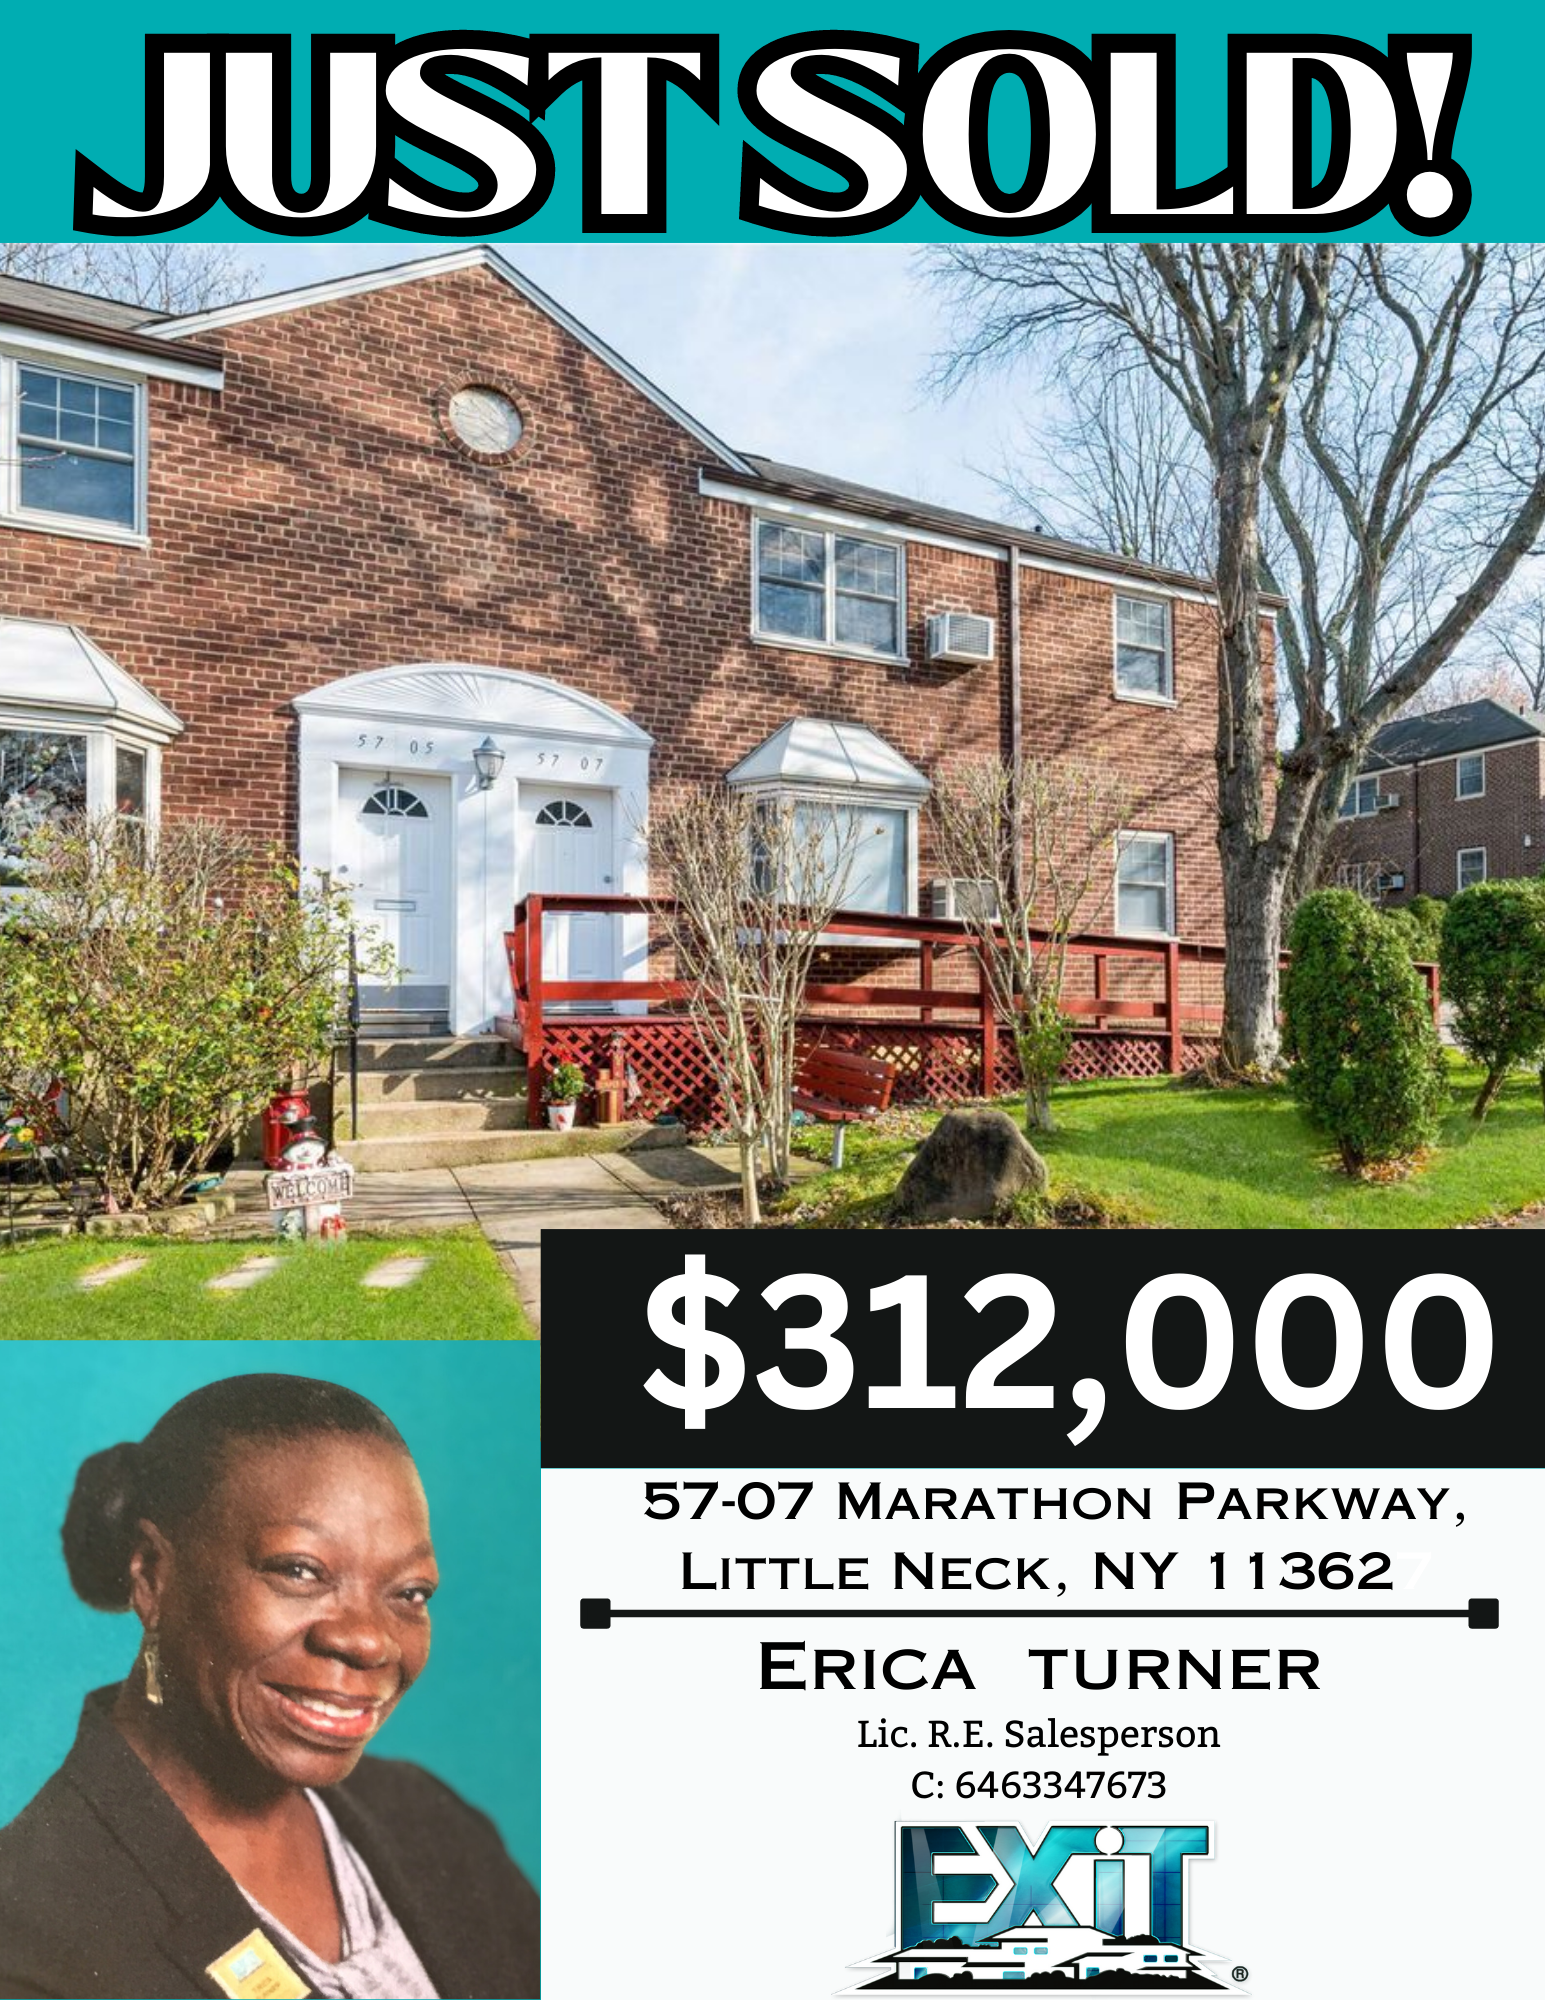 Just Sold by Erica Turner in Little Neck